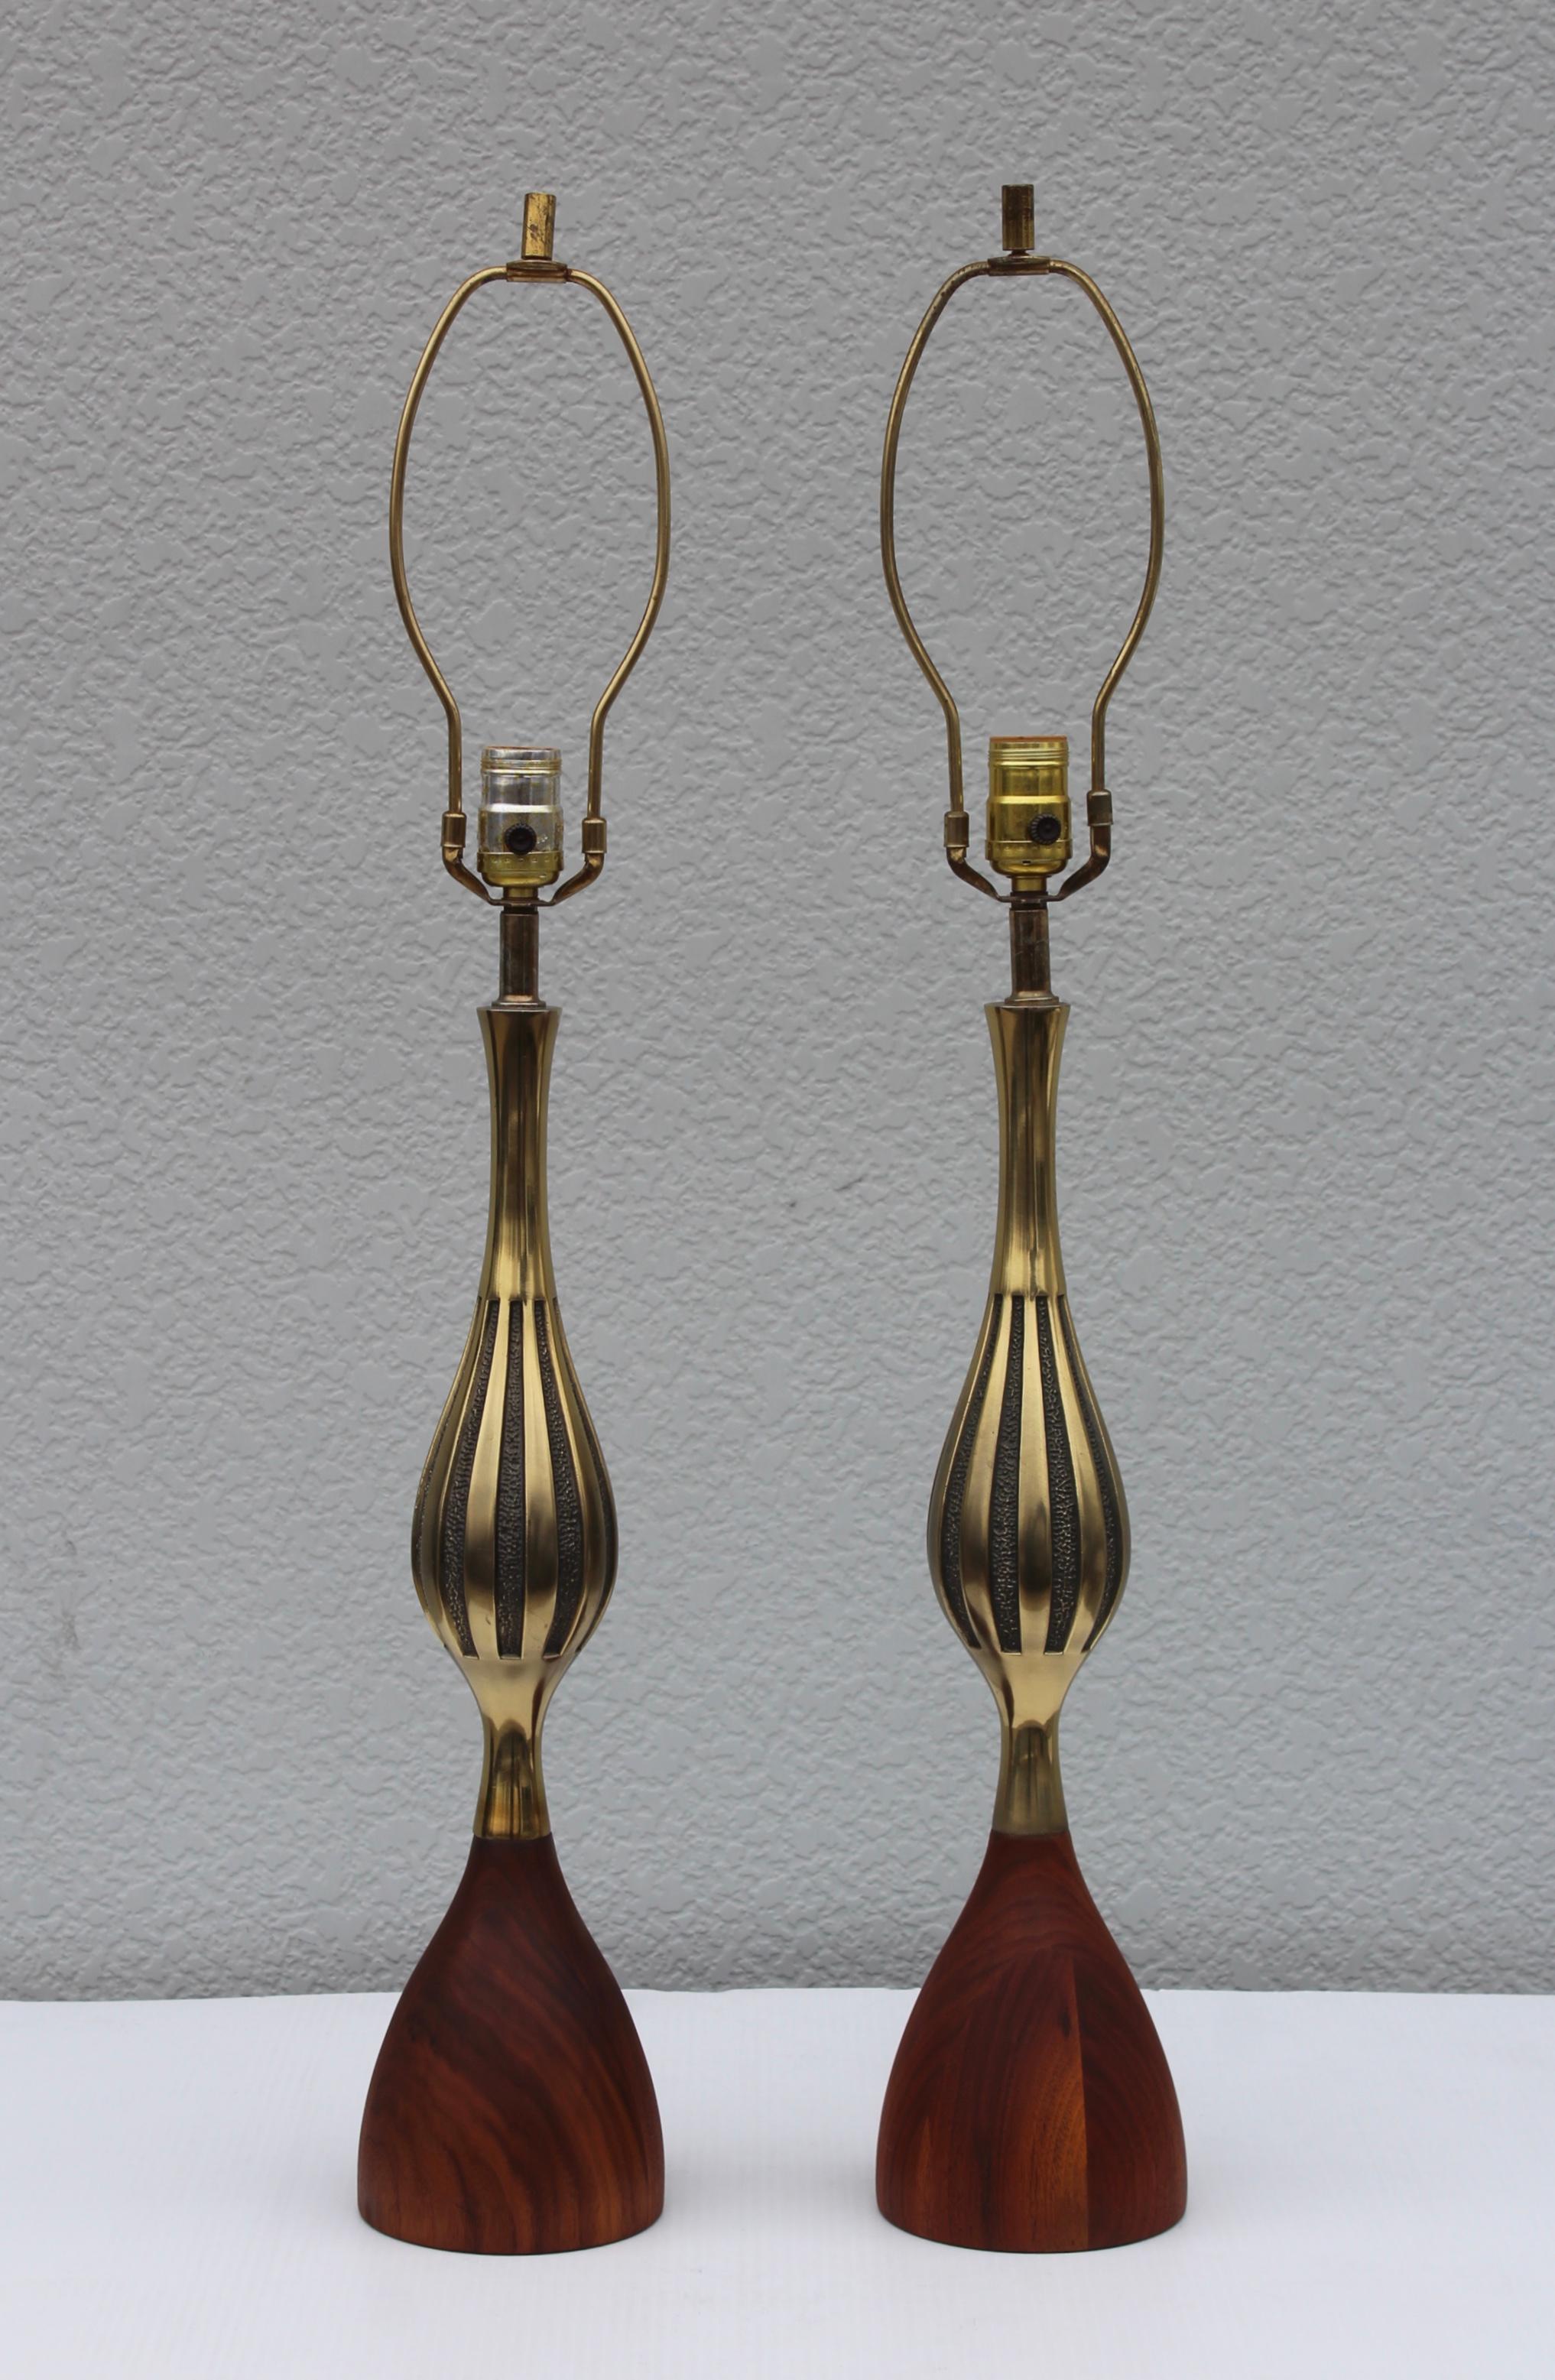 1960s Mid-Century Modern brass and walnut table lamps designed by Tony Paul for Westwood.

Height to light socket 24